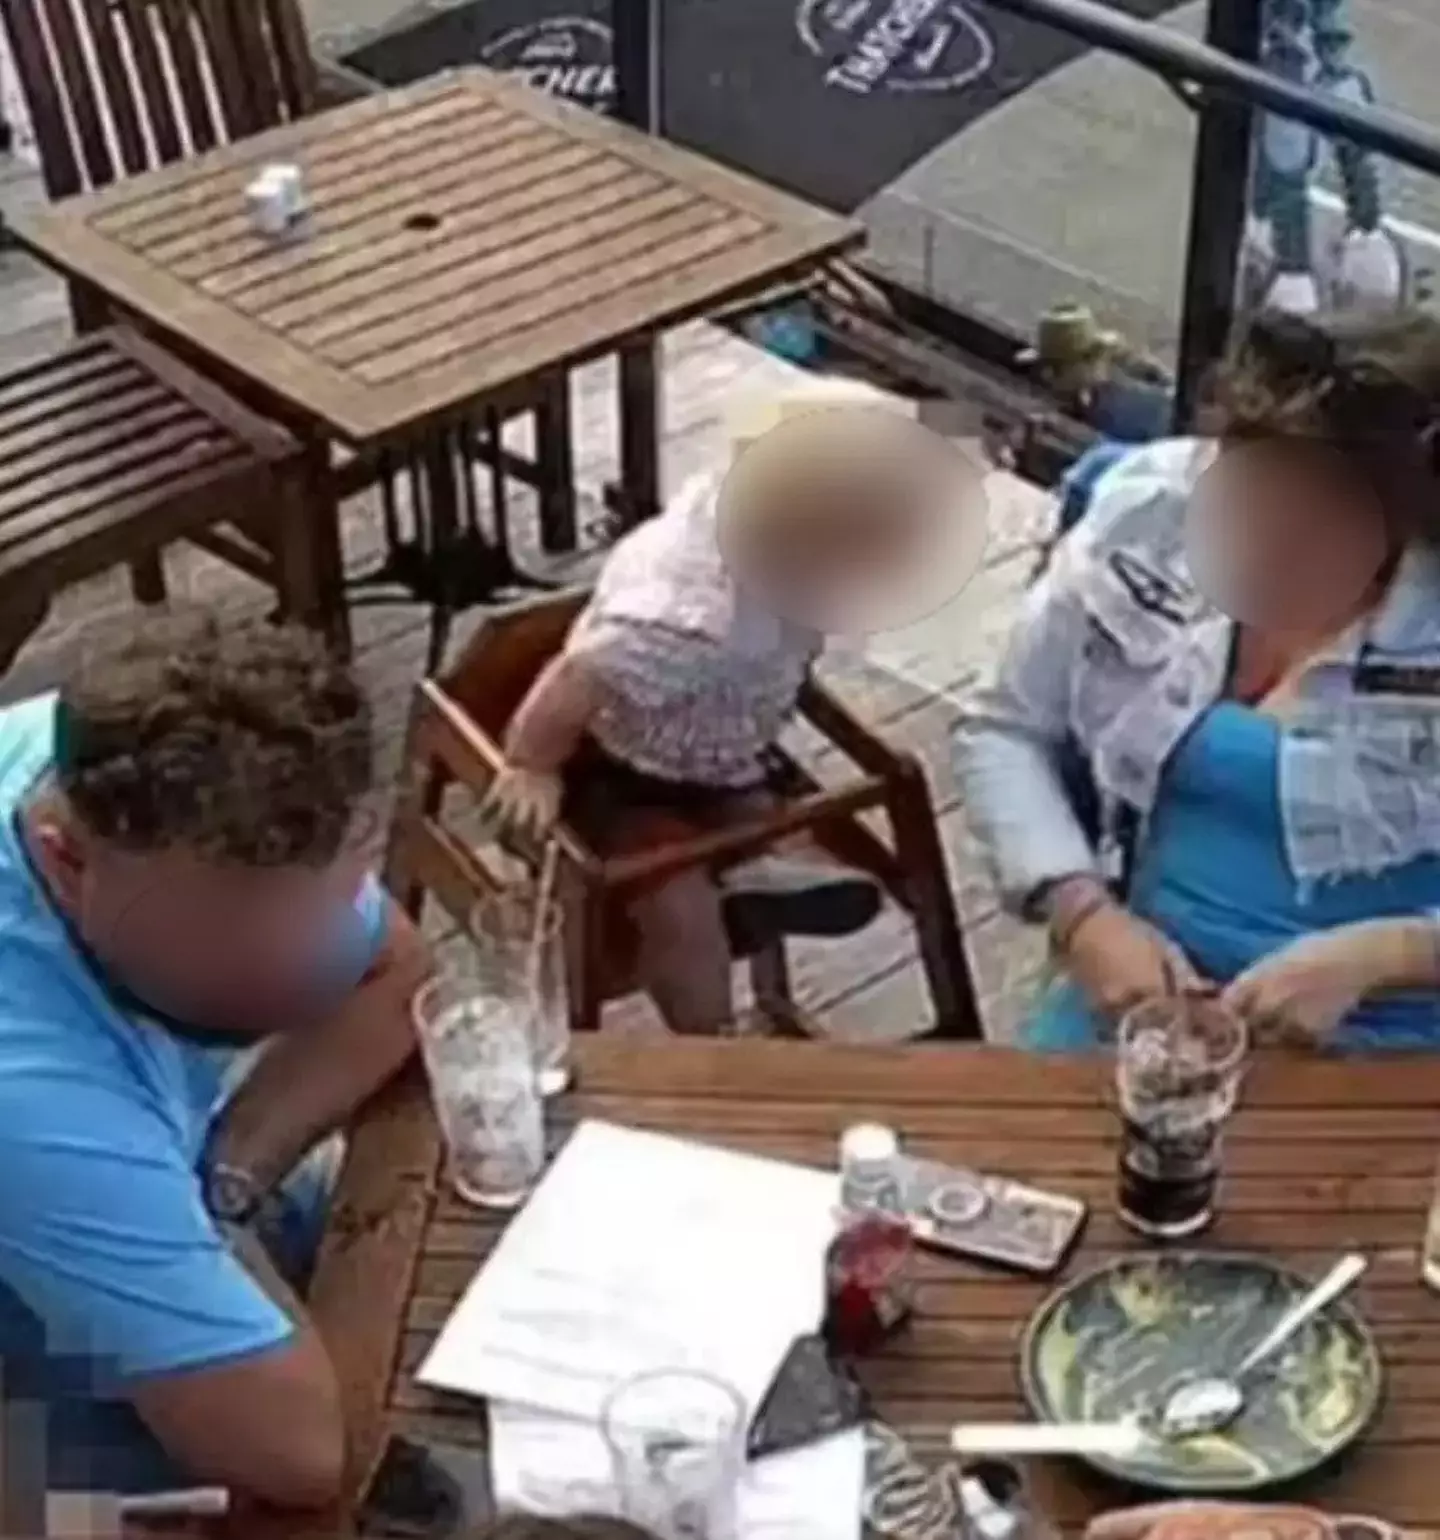 The restaurant have accused the family of walking out without paying.